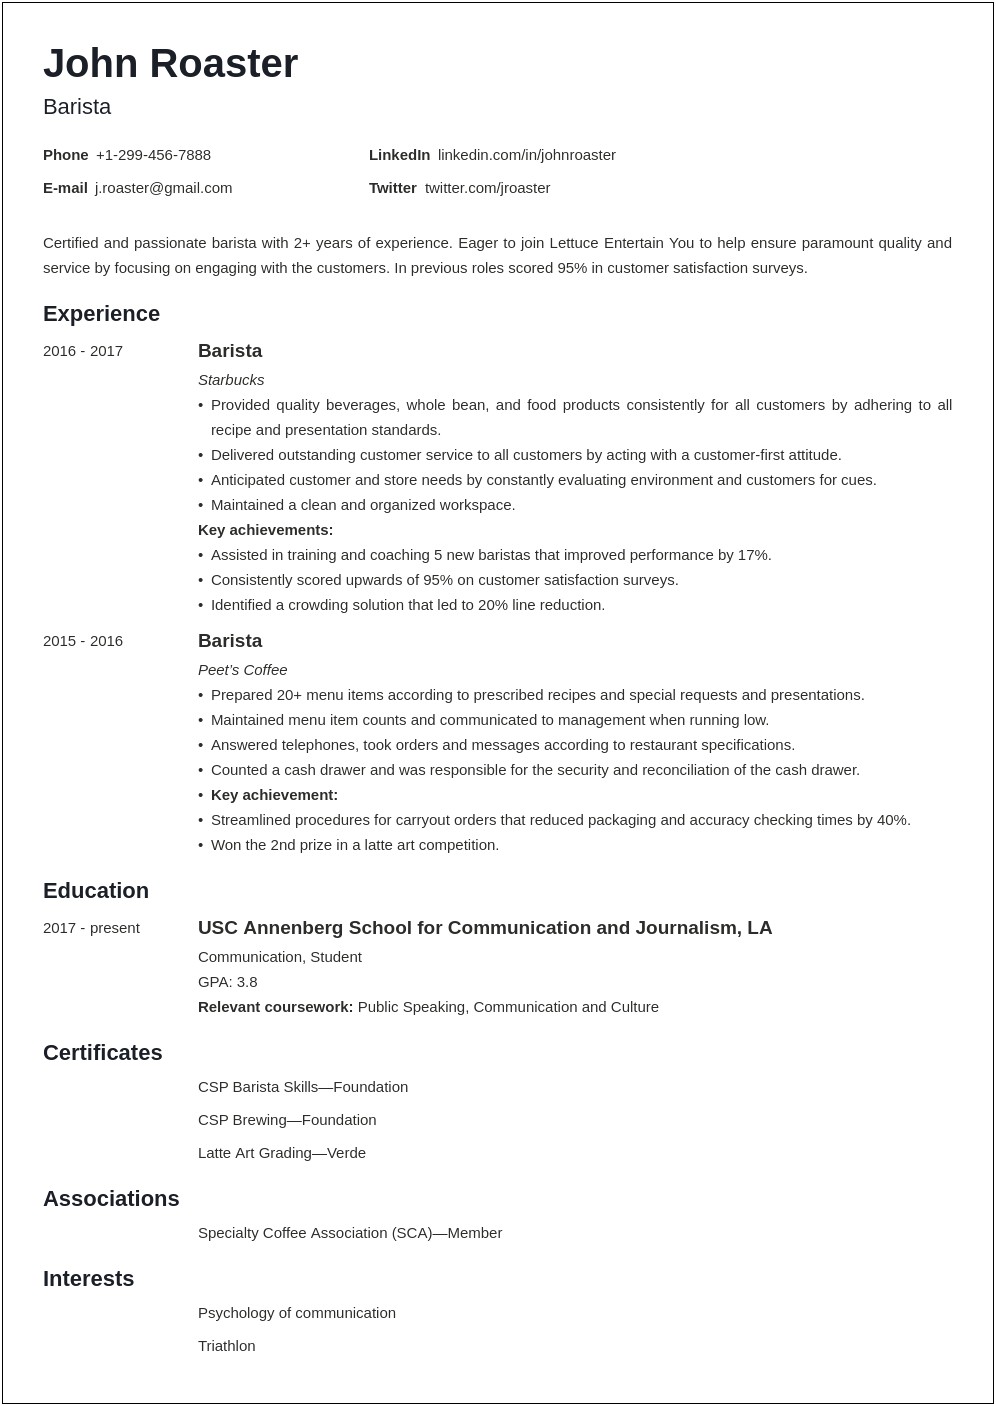 Put Specific Position Of Interest On Resume